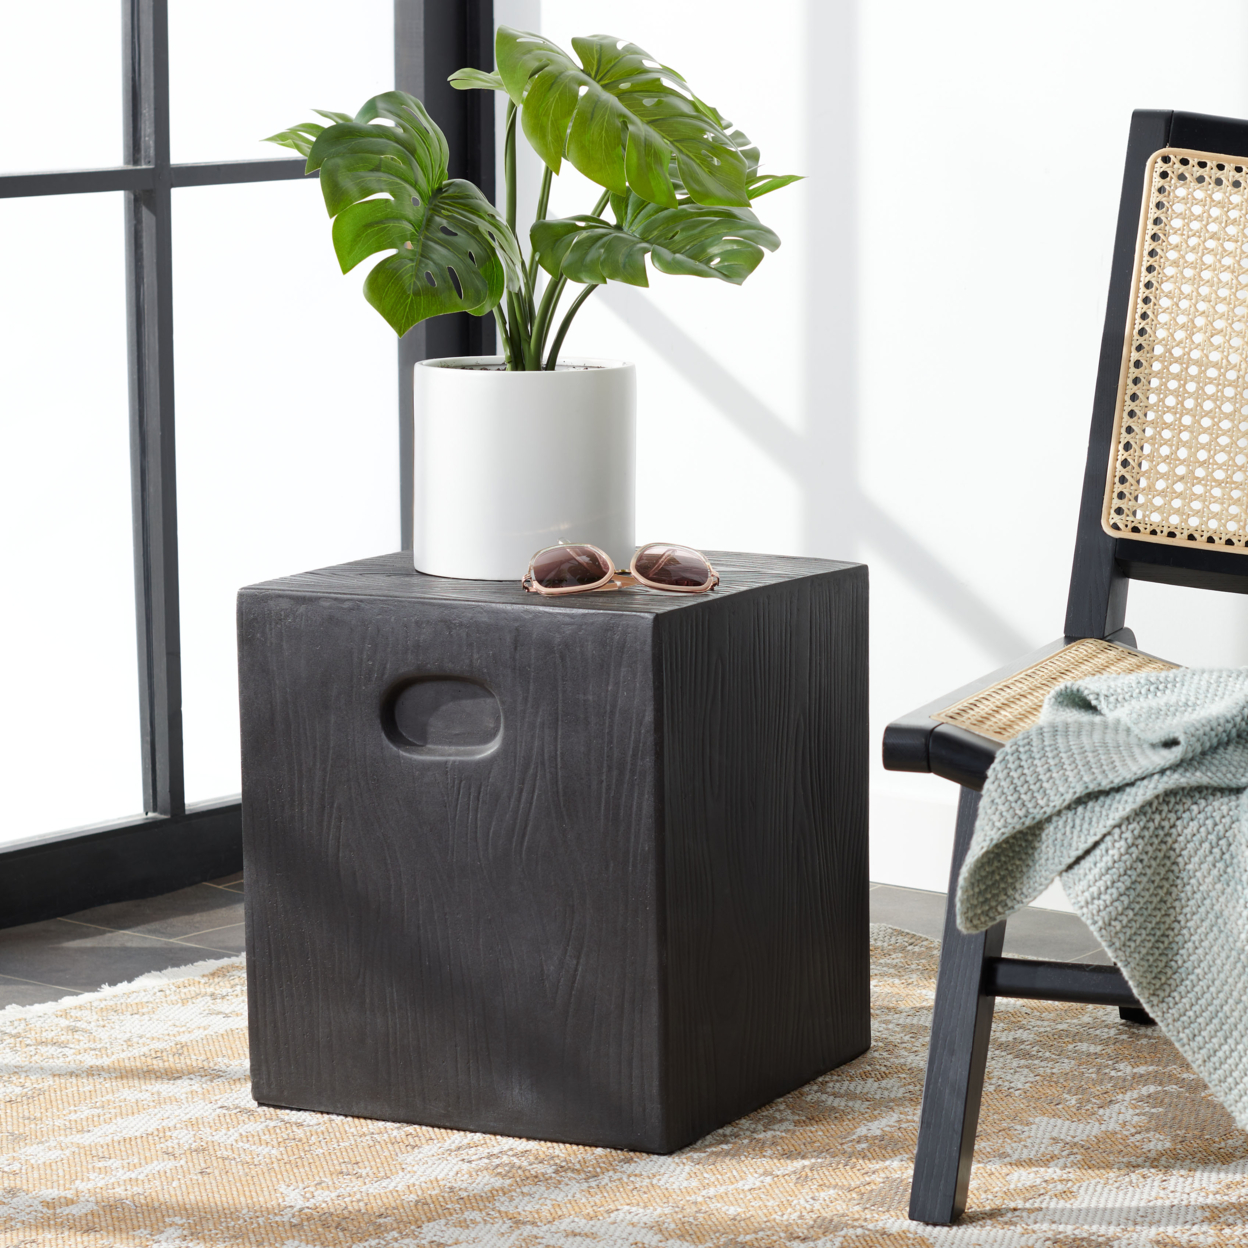 SAFAVIEH Outdoor Collection Cube Concrete Accent Stool Black